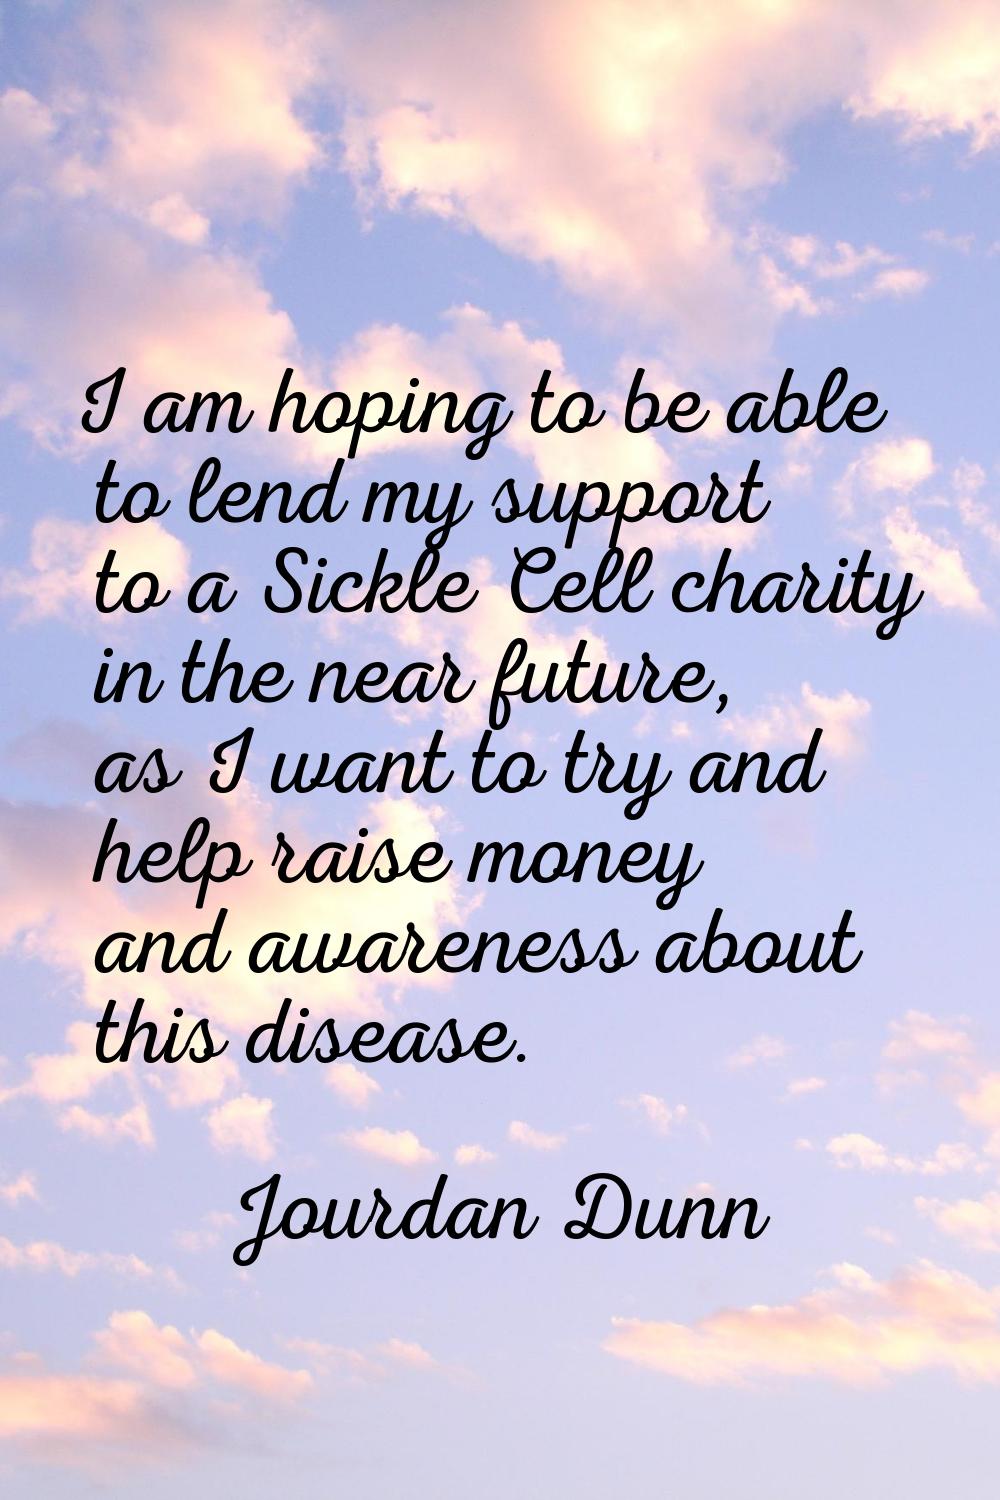 I am hoping to be able to lend my support to a Sickle Cell charity in the near future, as I want to